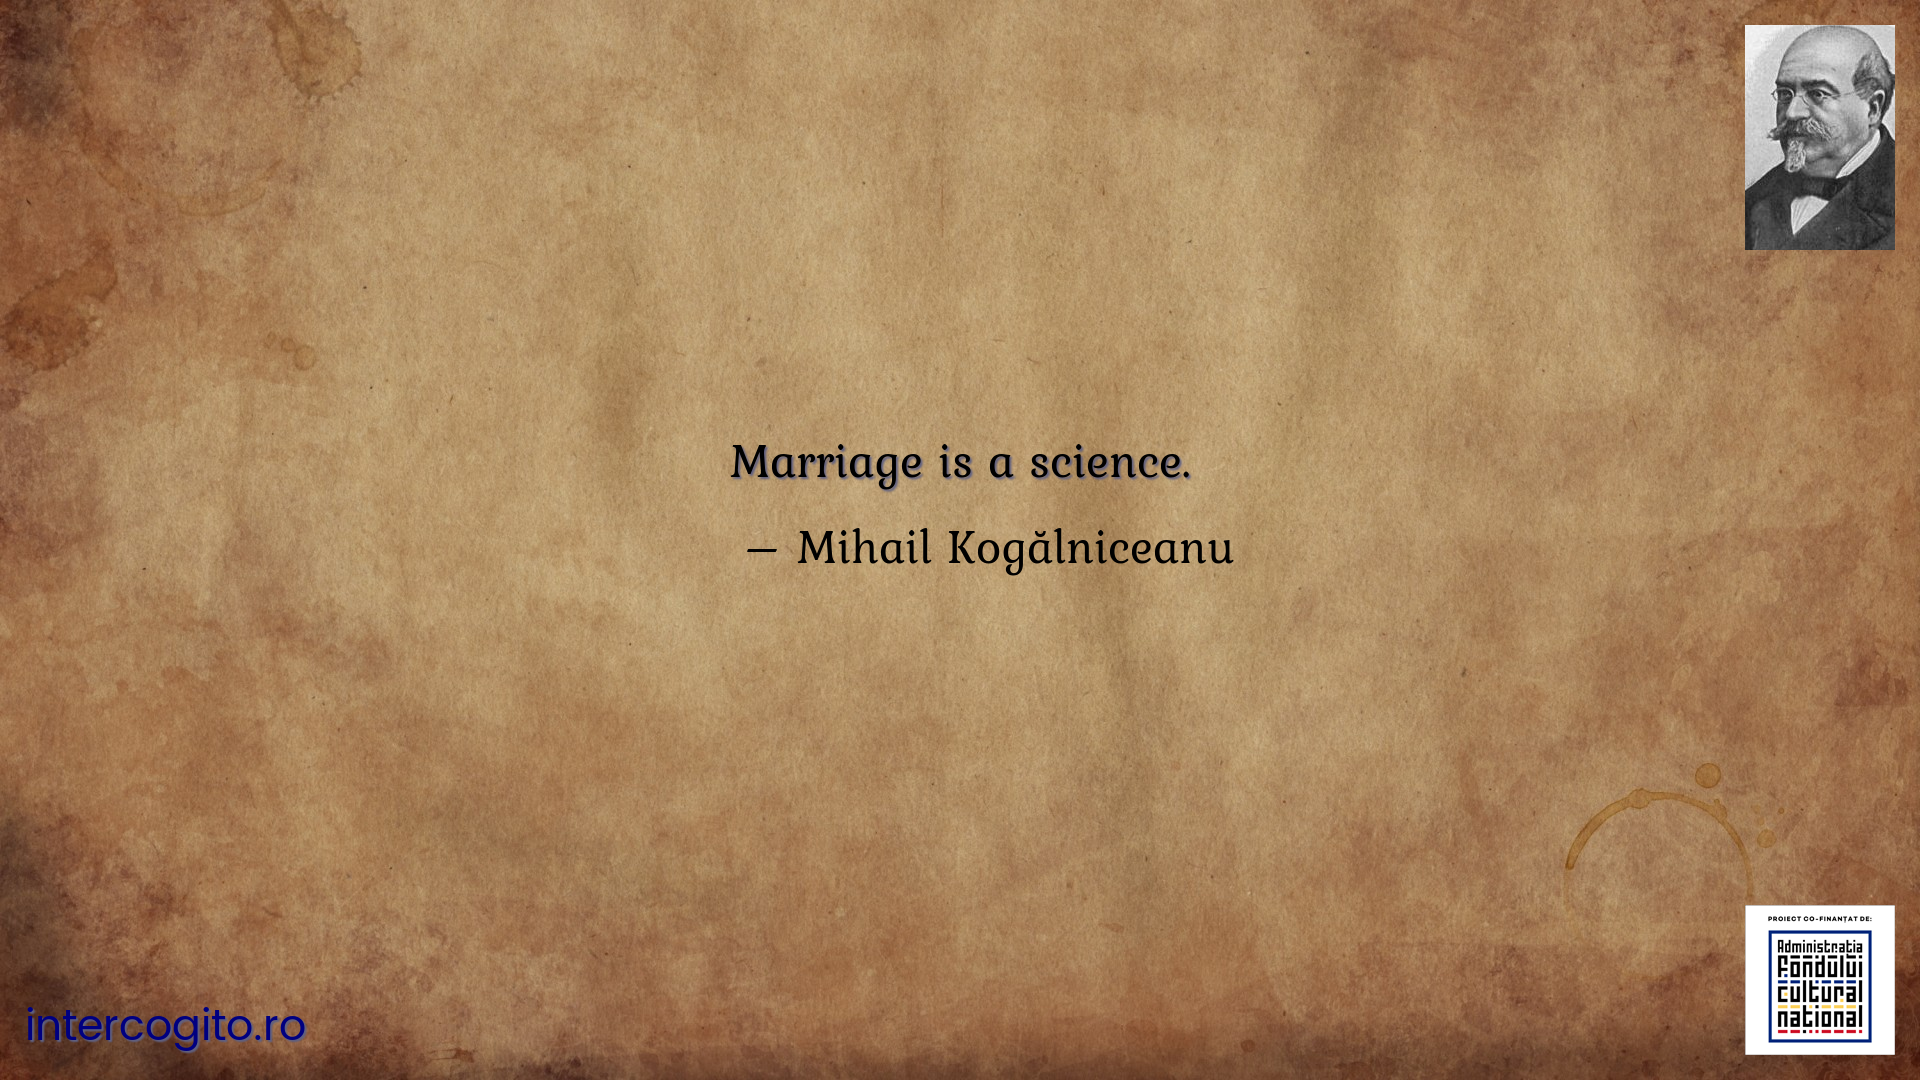 Marriage is a science.